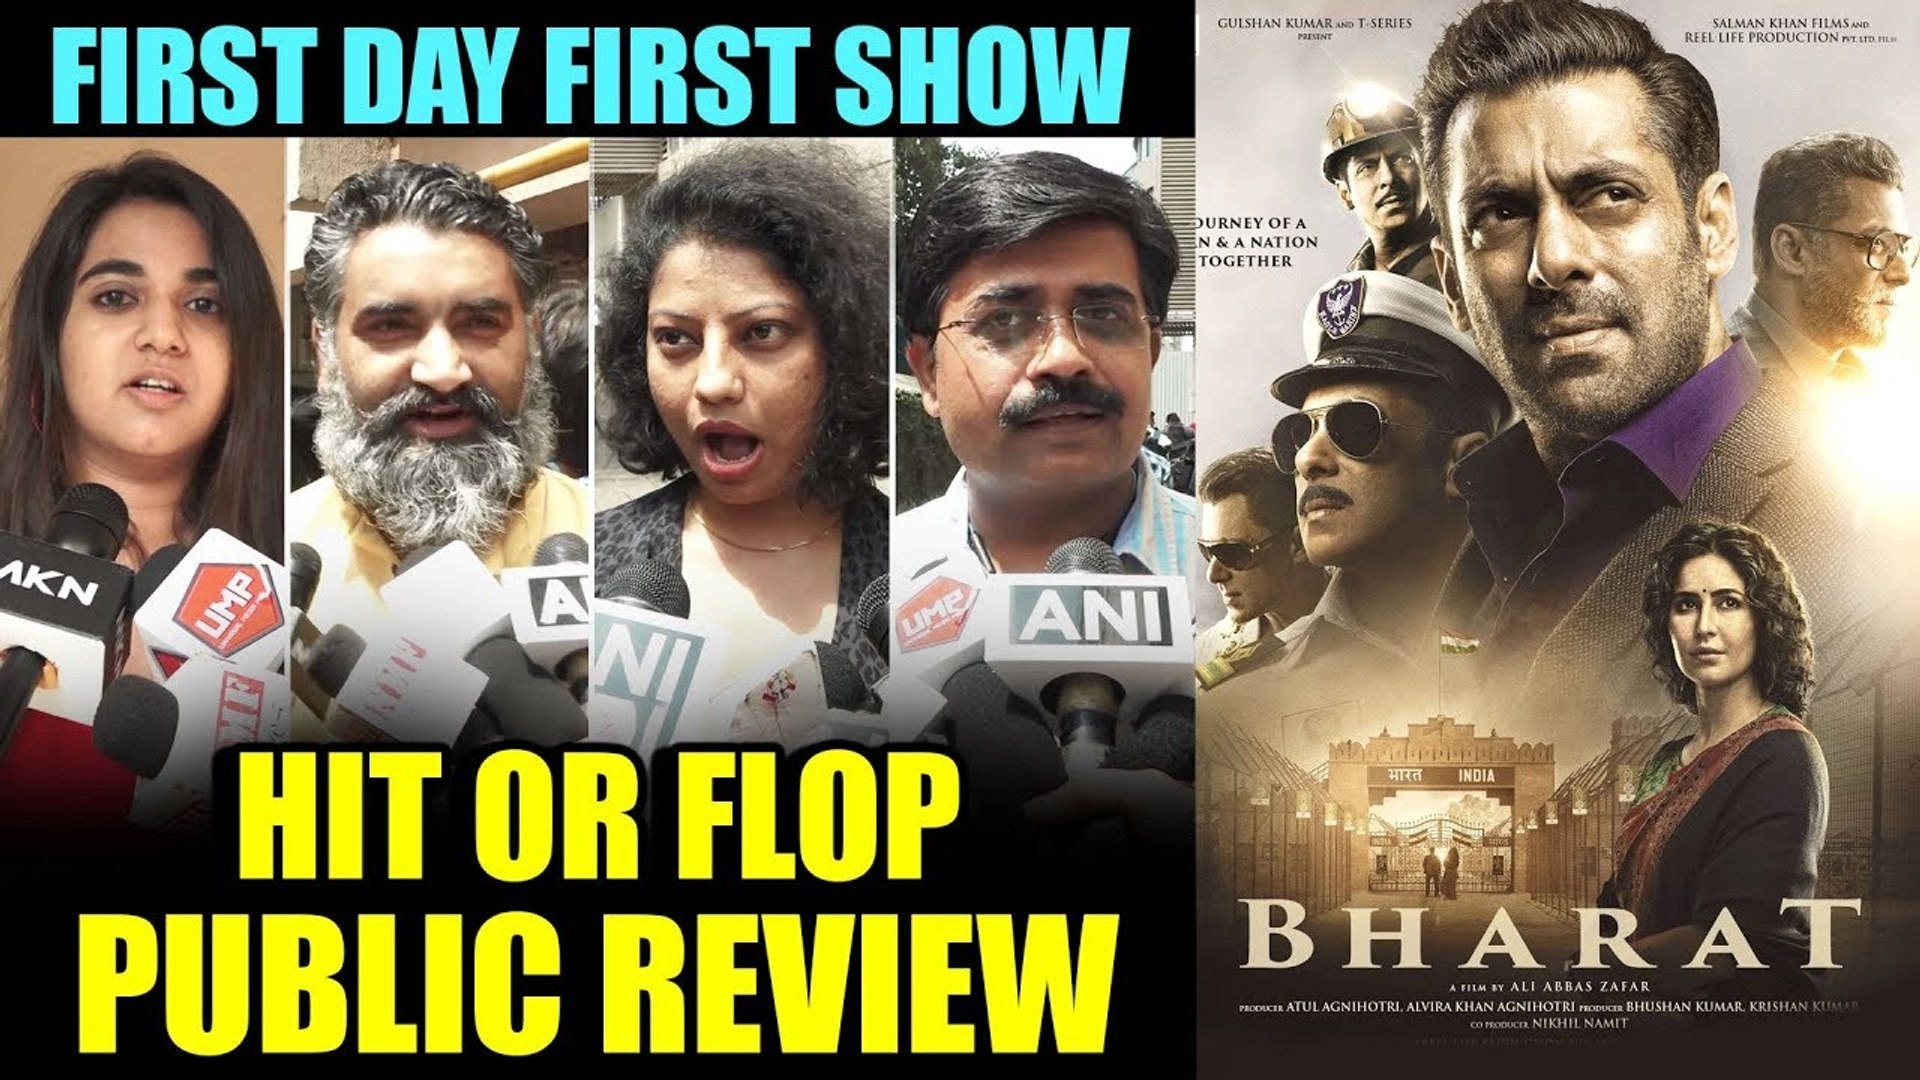 Bharat Movie First Day Public Review Wallpaper